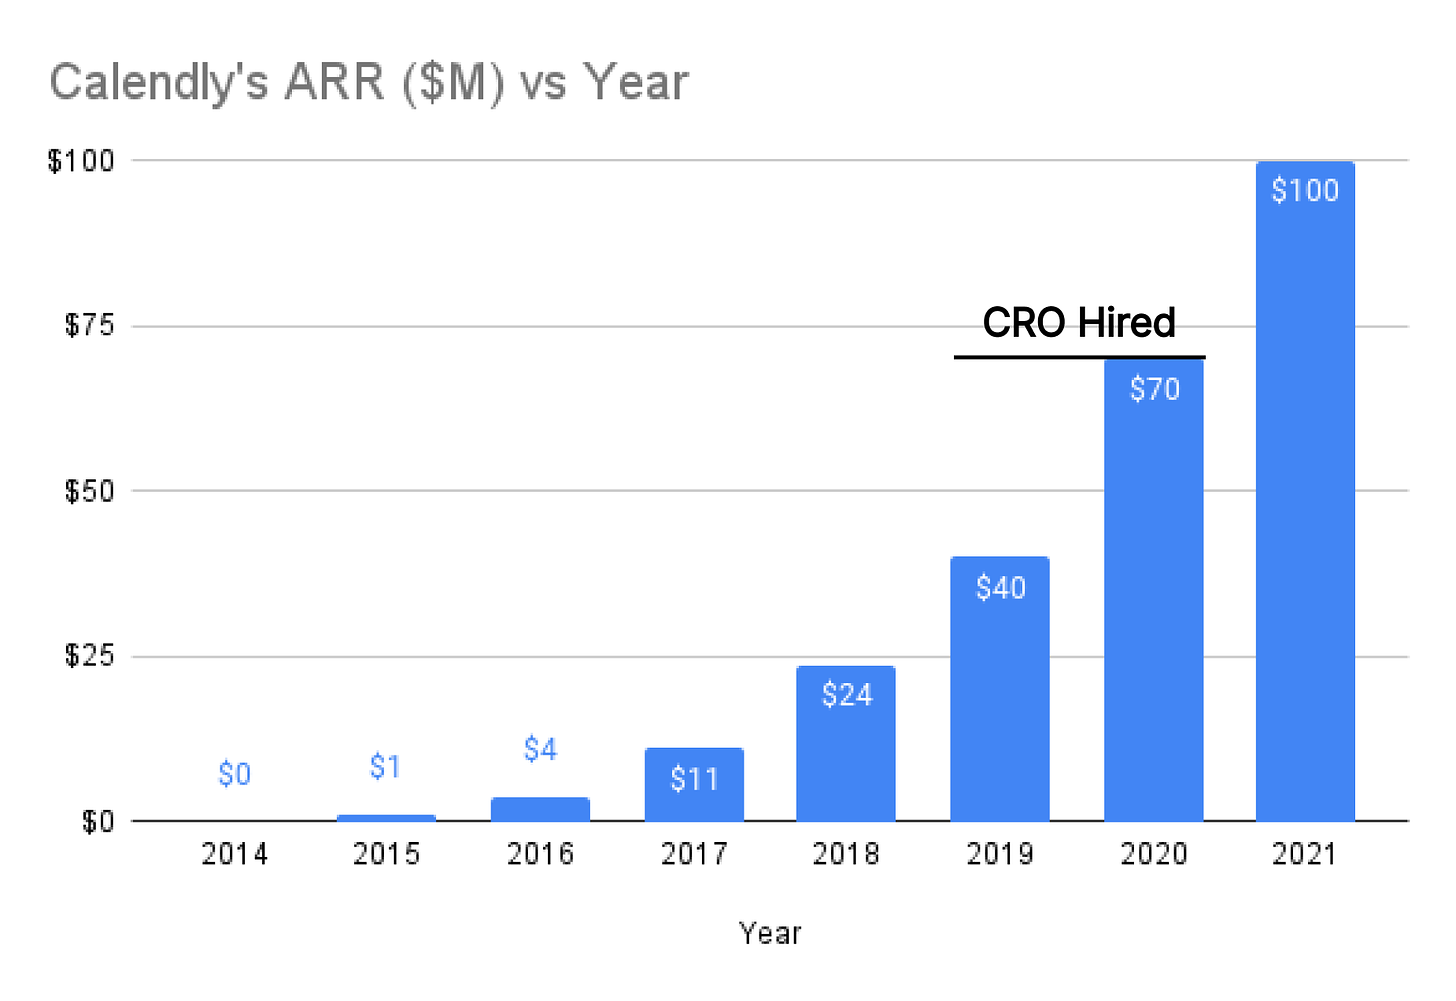 How Calendly will scale to $1B ARR 🚀